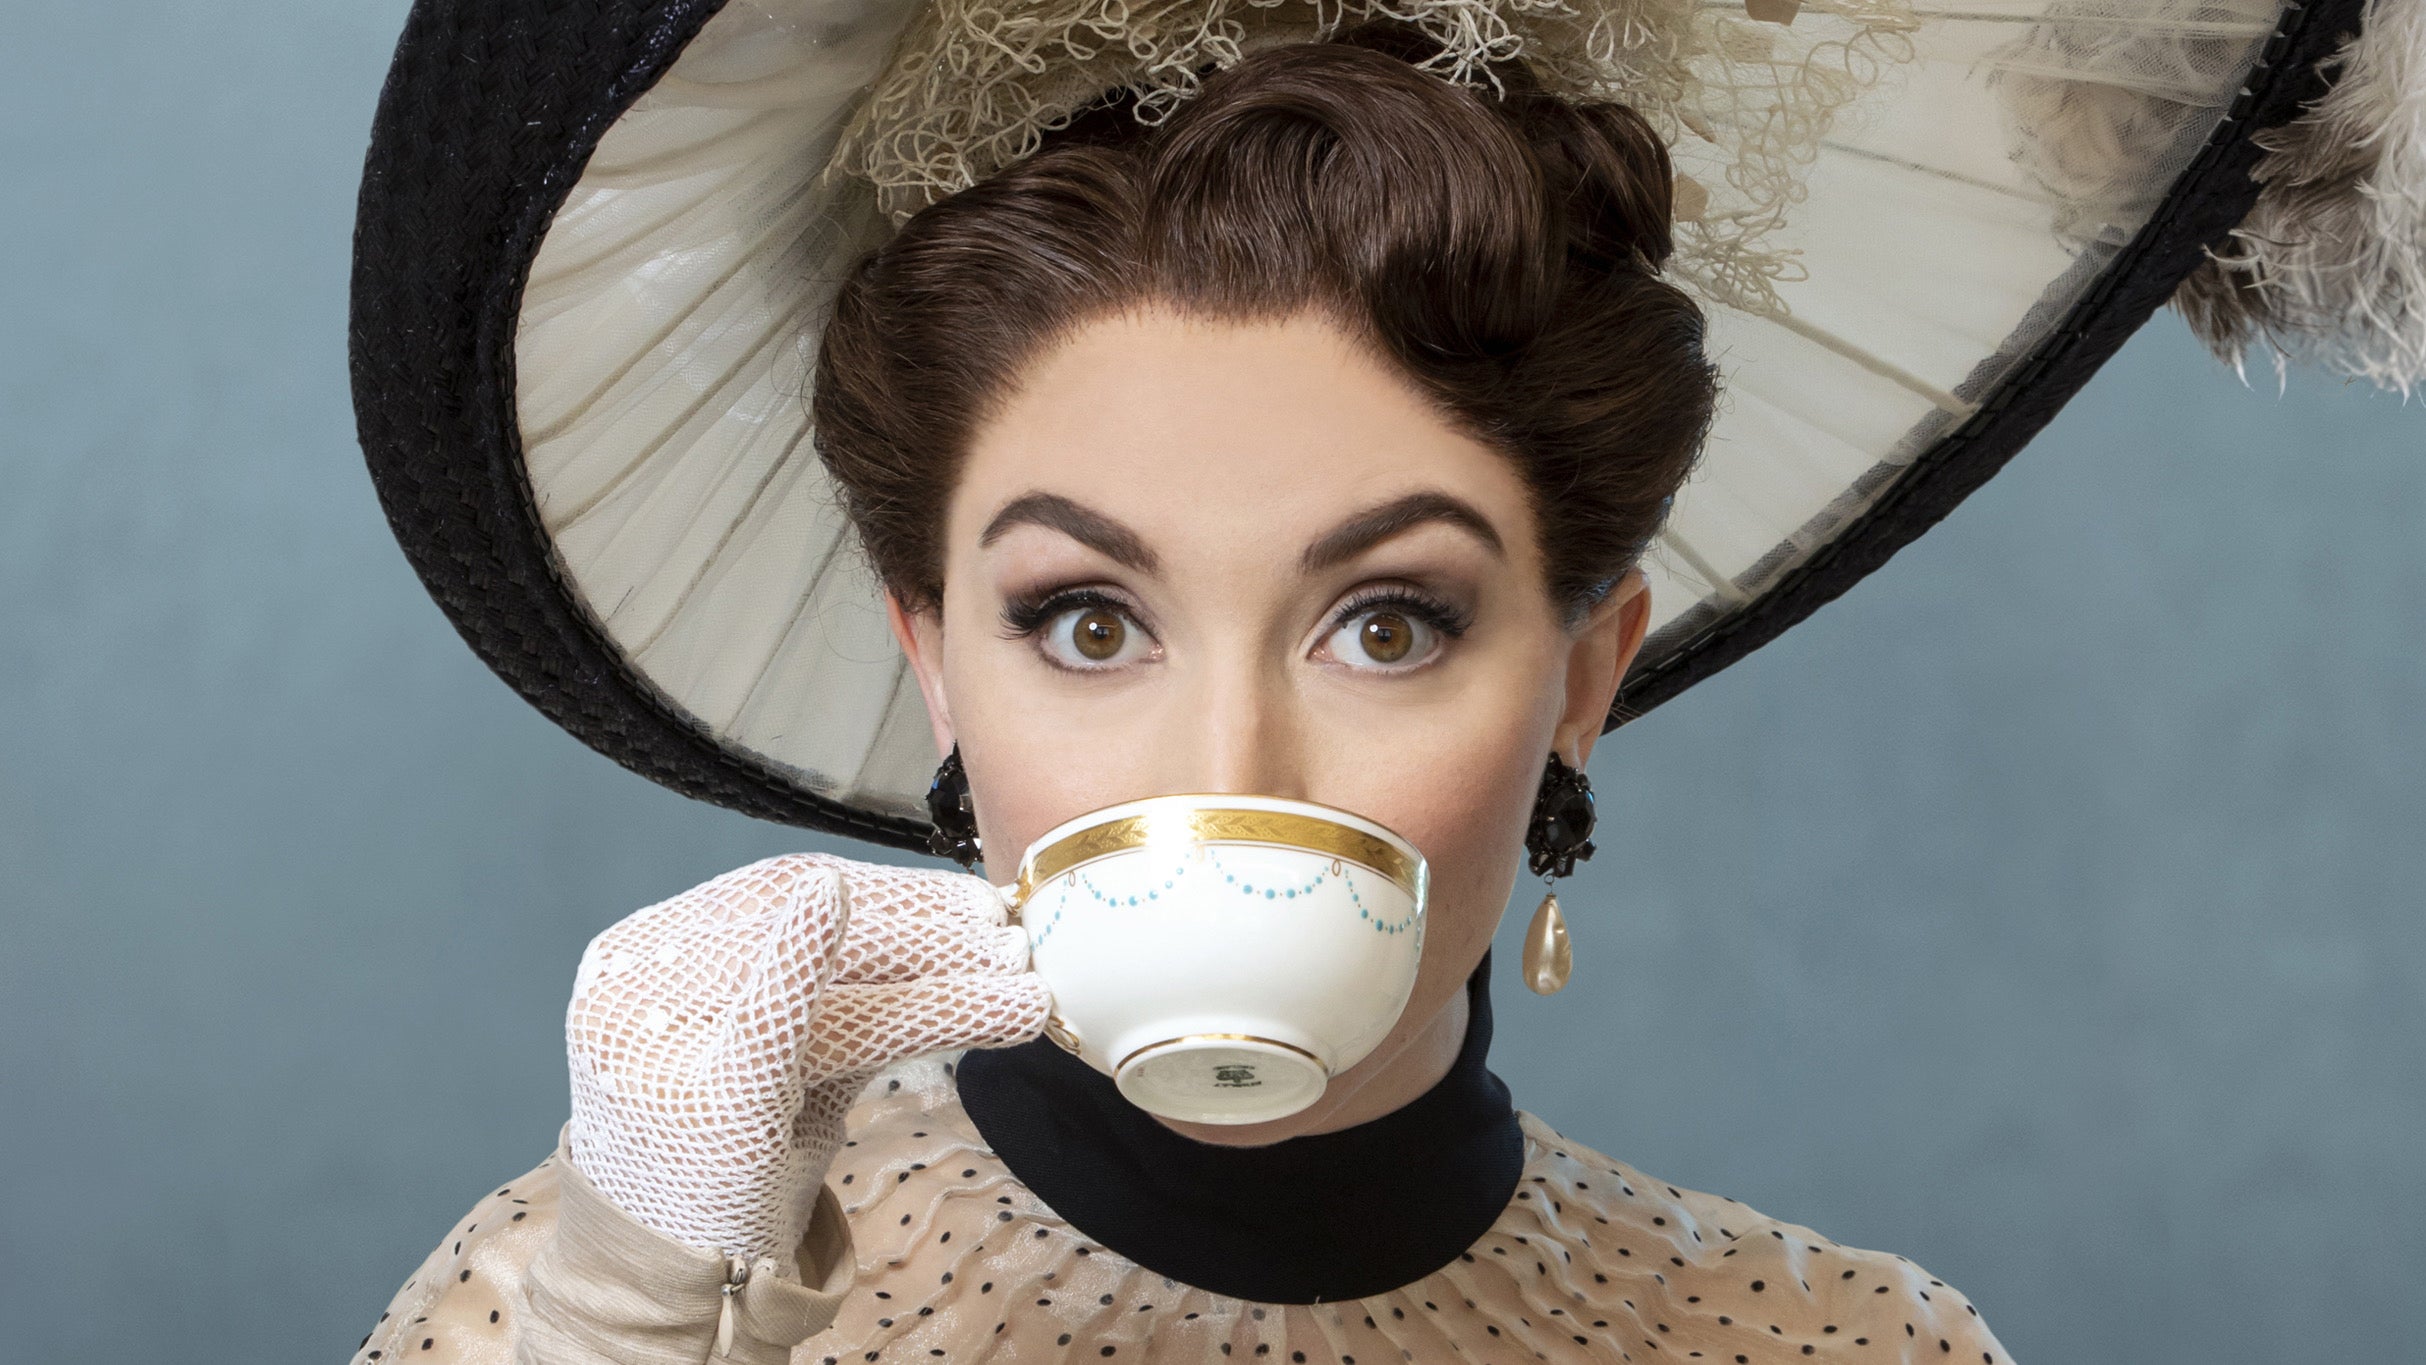 My Fair Lady at Cortland Repertory Theatre in Little York Pavilion – Preble, NY